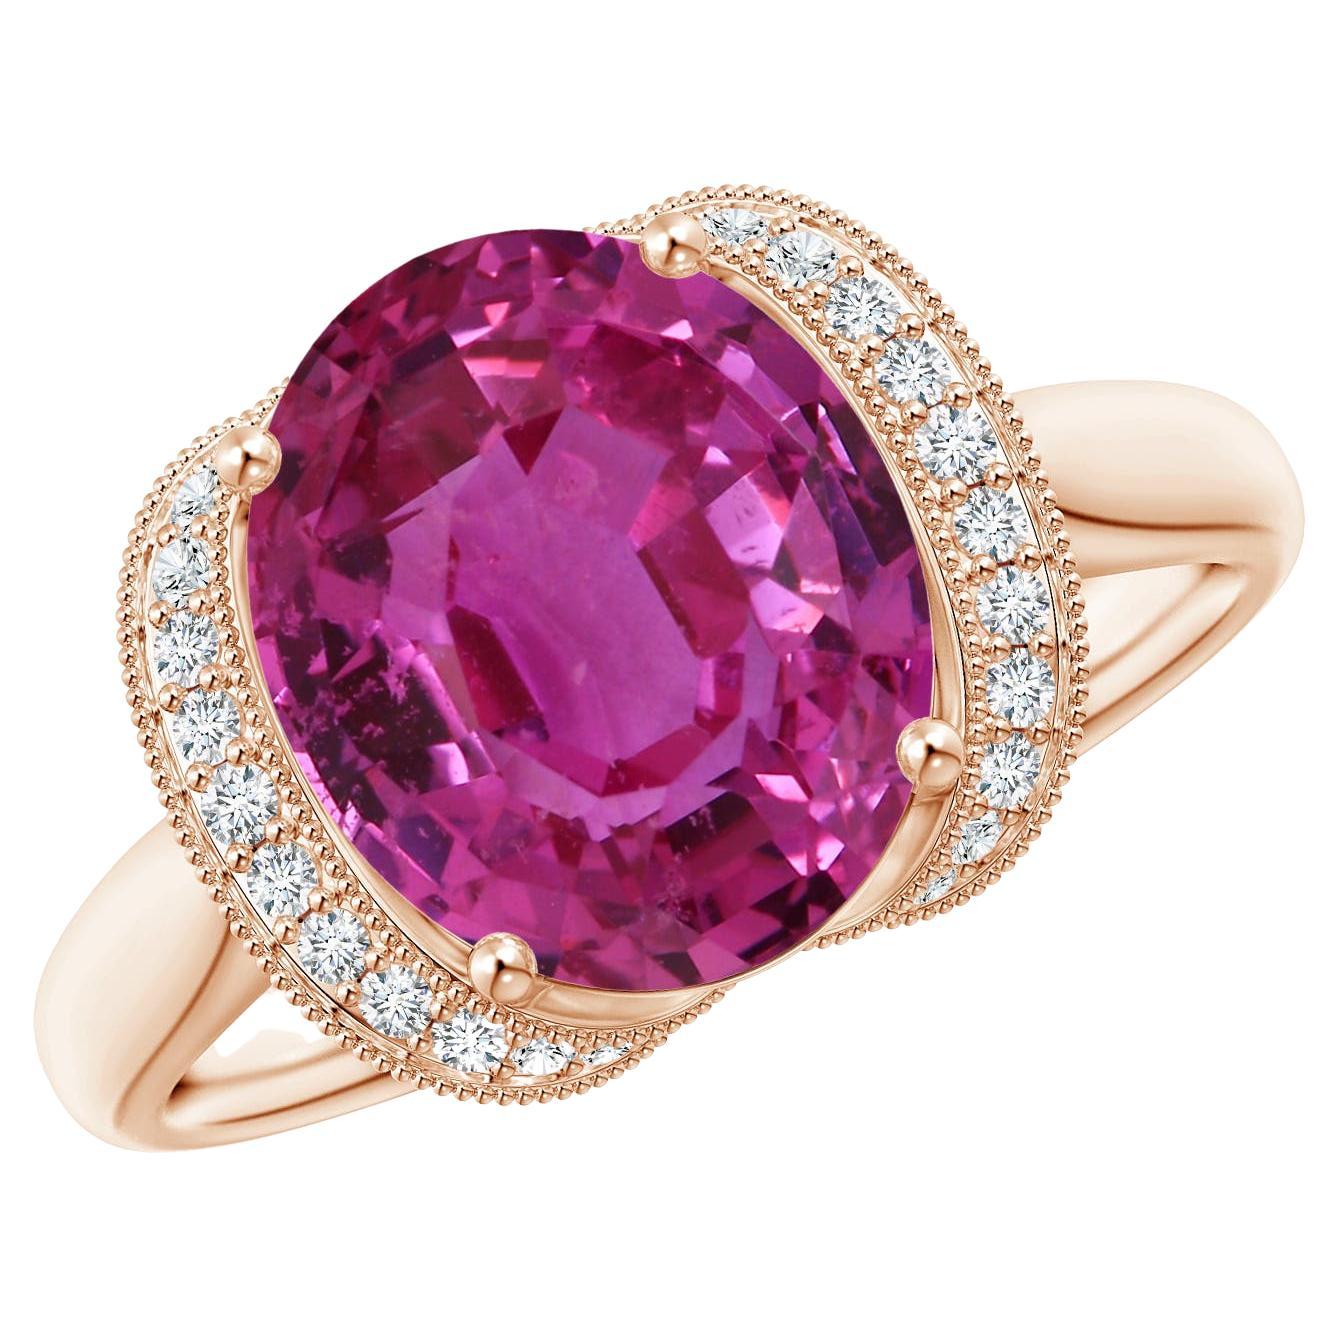 For Sale:  Angara Gia Certified Pink Sapphire Ring in Rose Gold with Diamond Half Halo